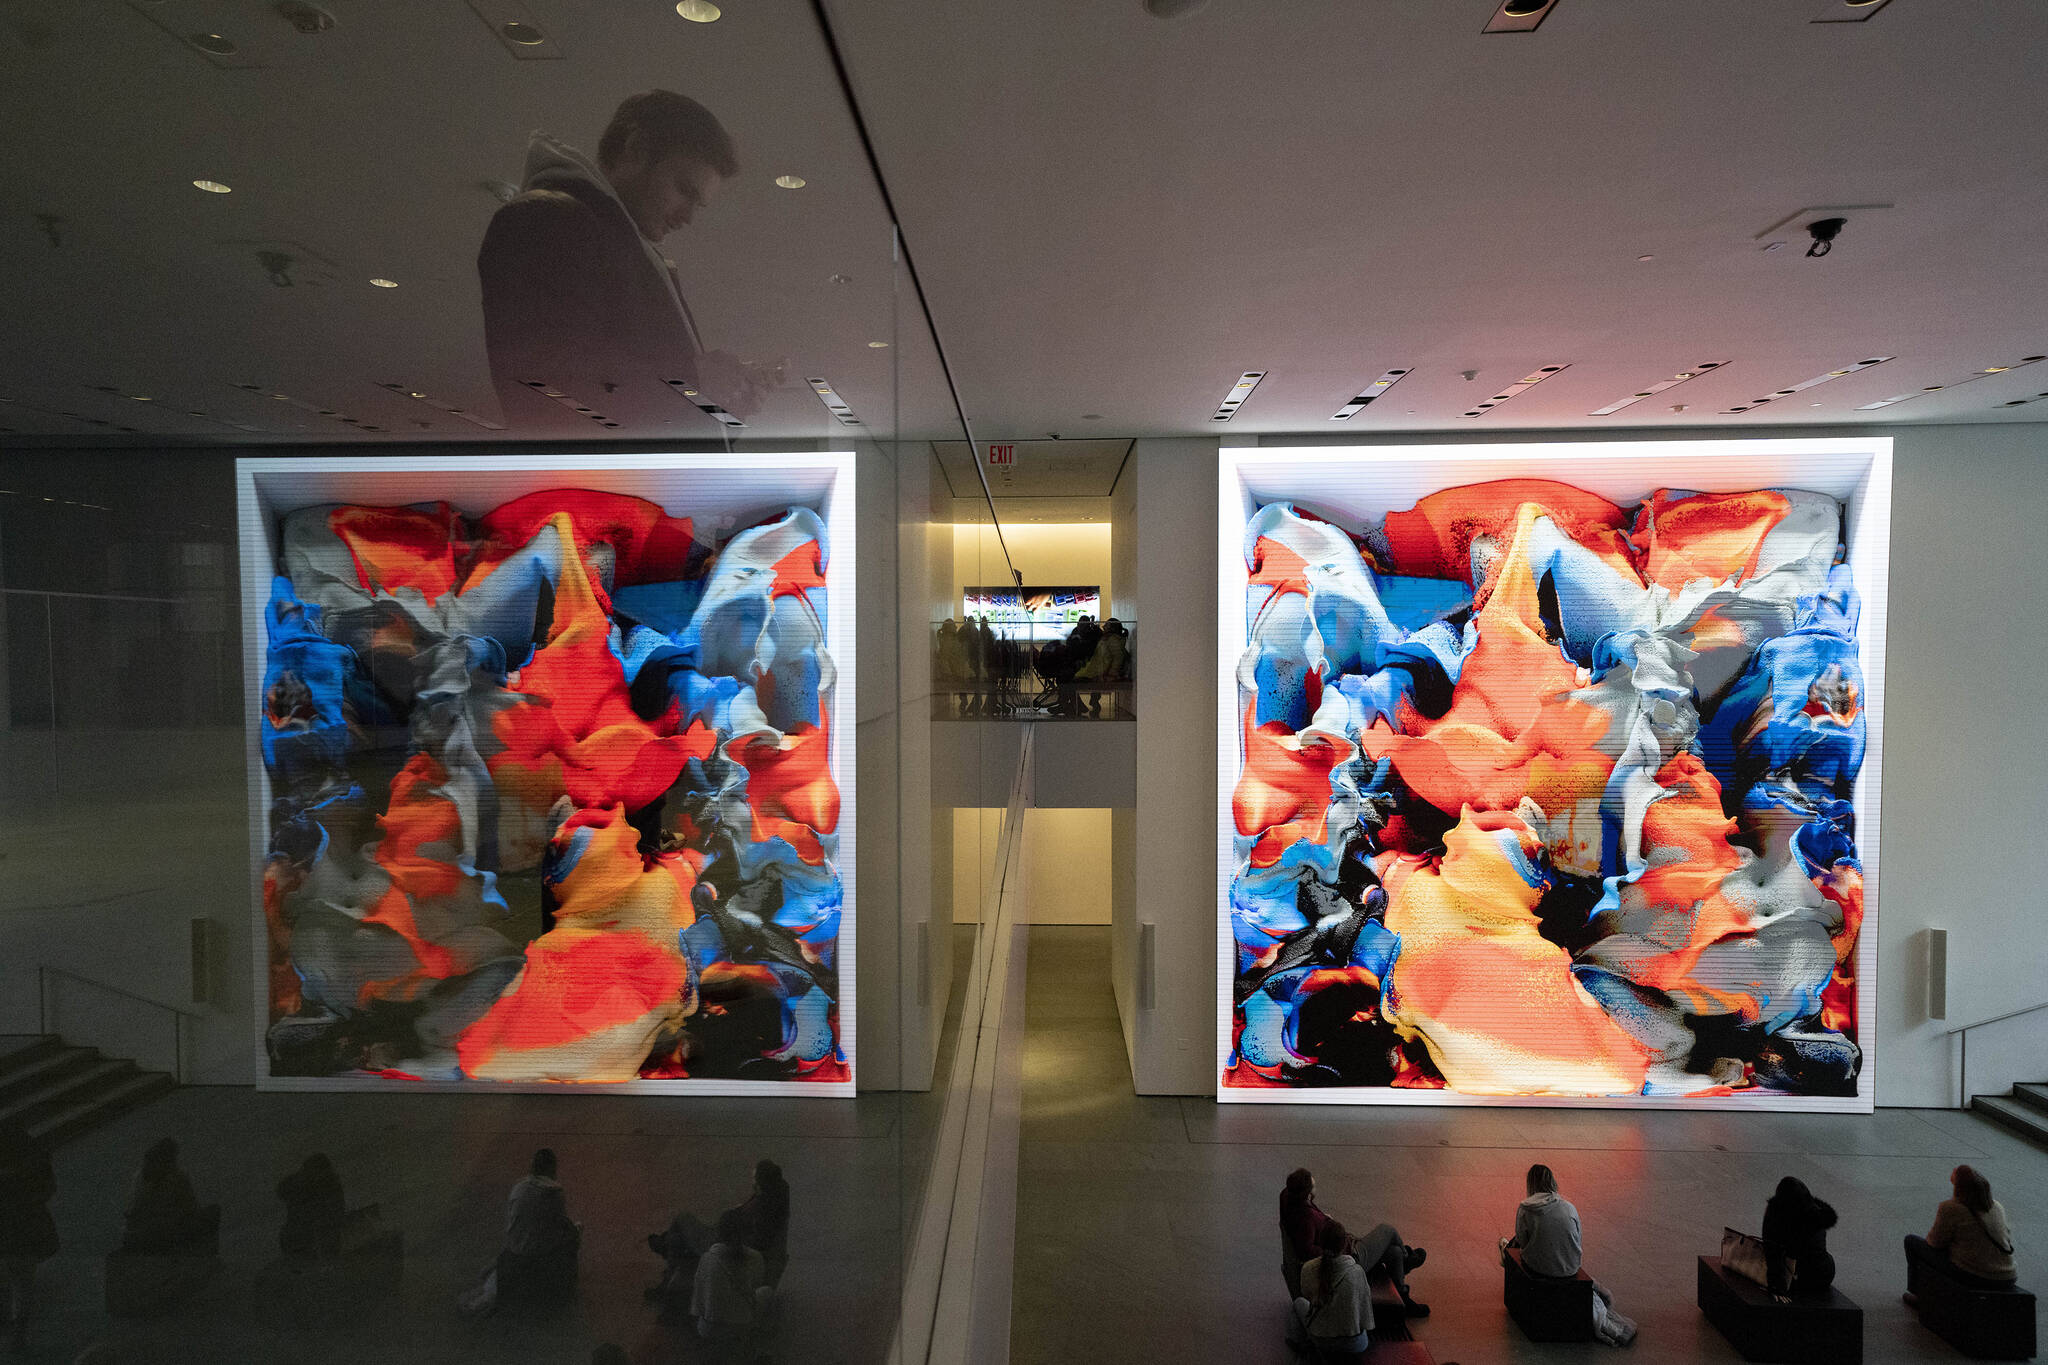 Visitors view artist Refik Anadol’s “Unsupervised” exhibit at the Museum of Modern Art, Wednesday, Jan. 11, 2023, in New York. The new AI-generated installation is meant to be a thought-provoking interpretation of the New York City museum’s prestigious collection. (AP Photo/John Minchillo)